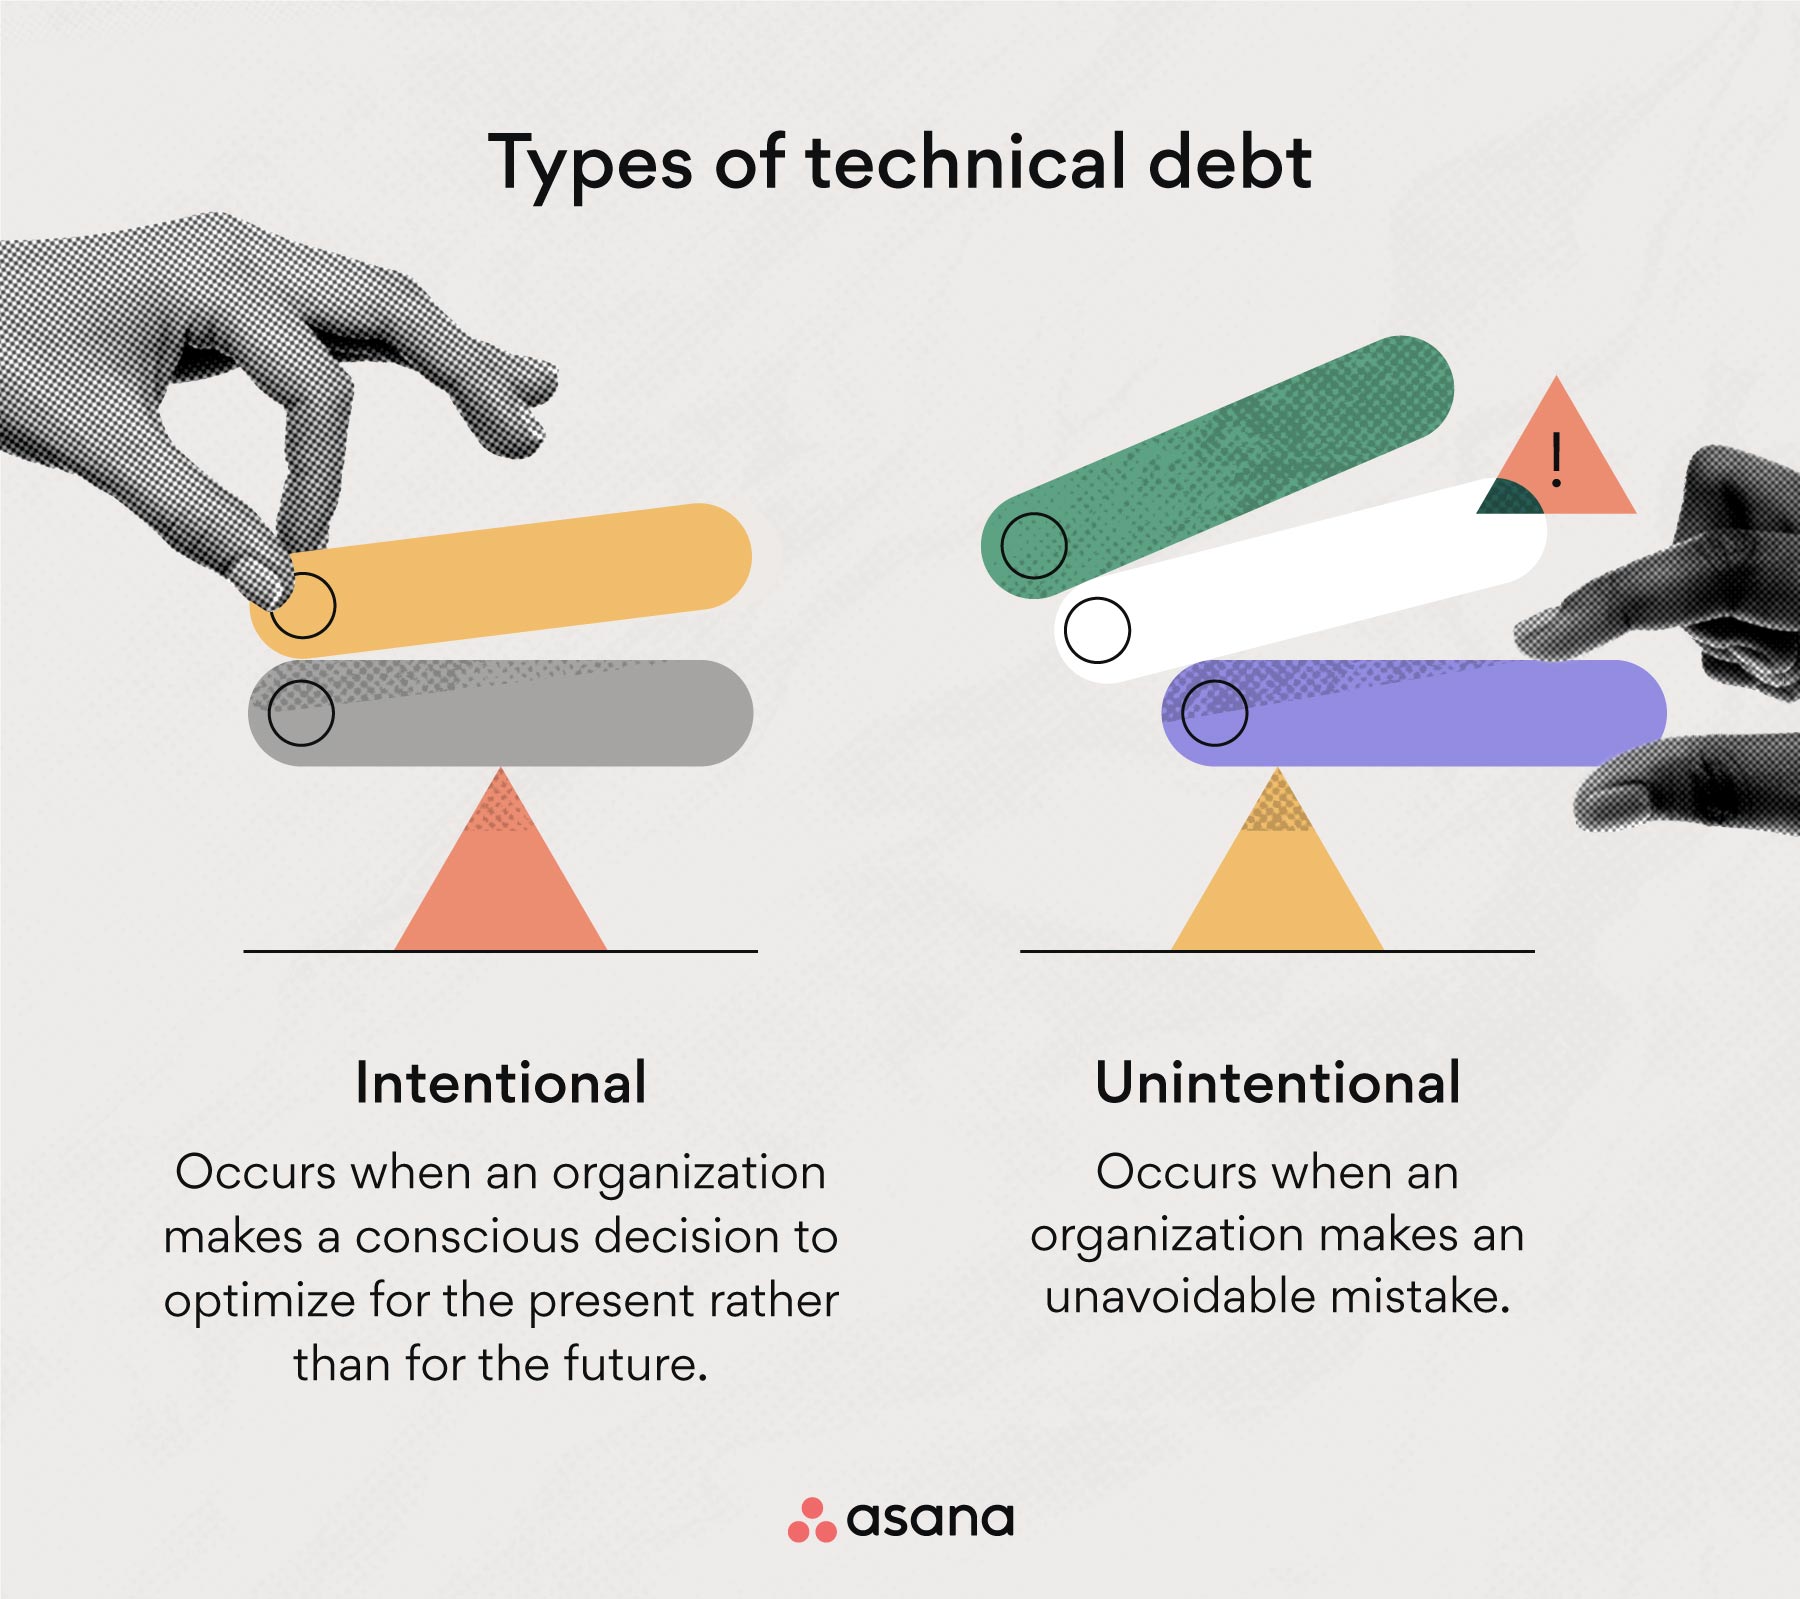 Types of technical debt